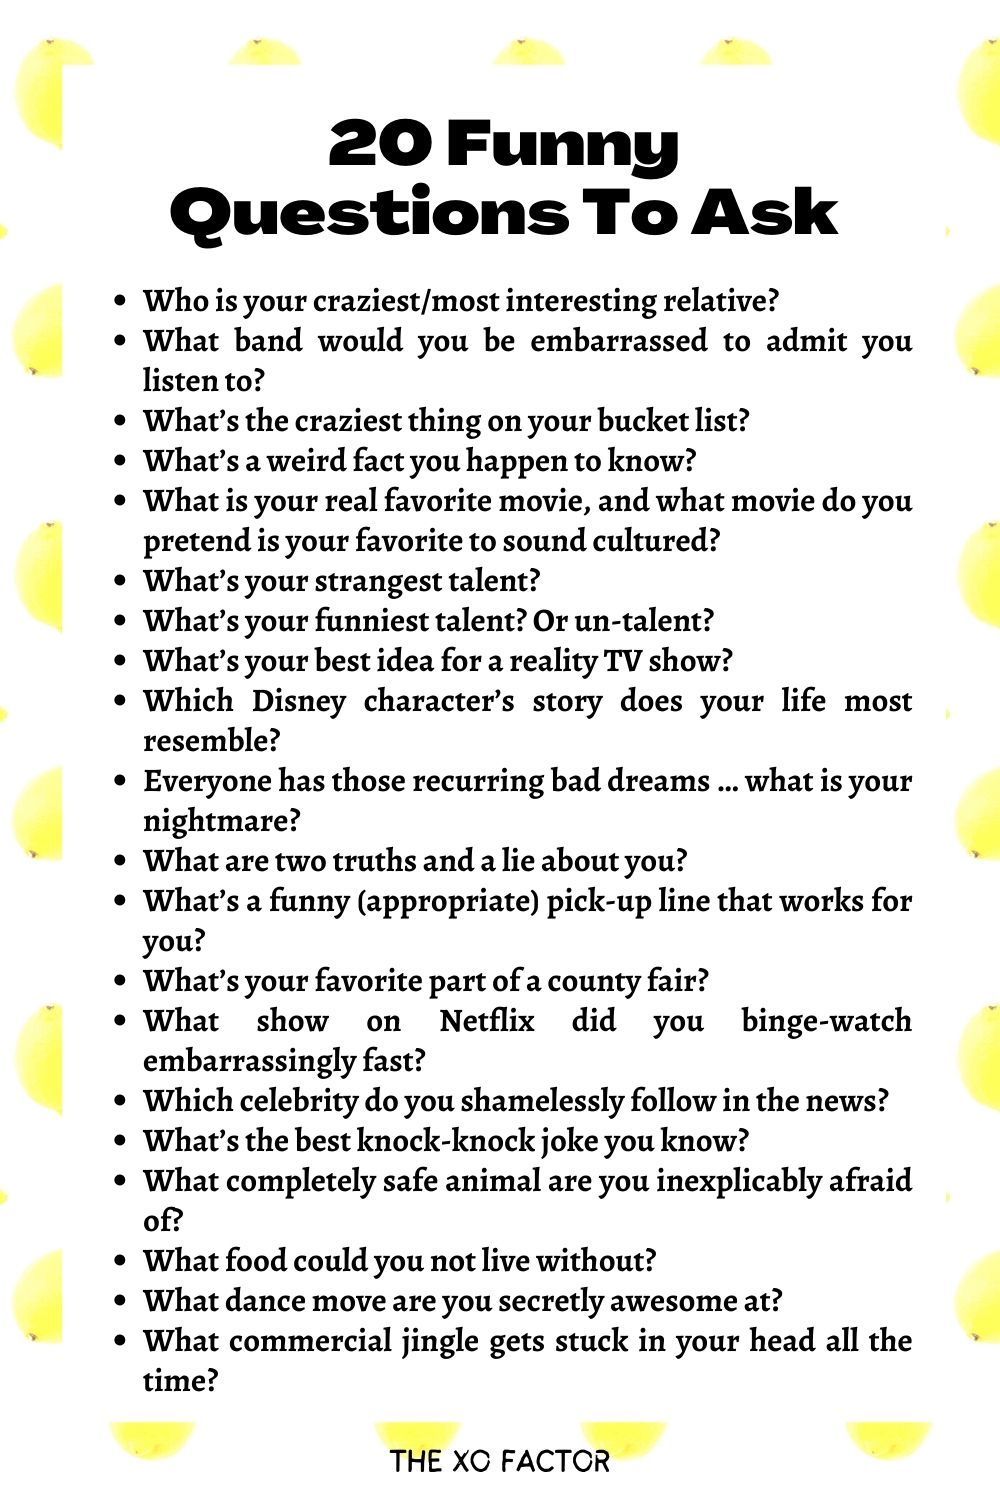 20 Funny Questions To Ask